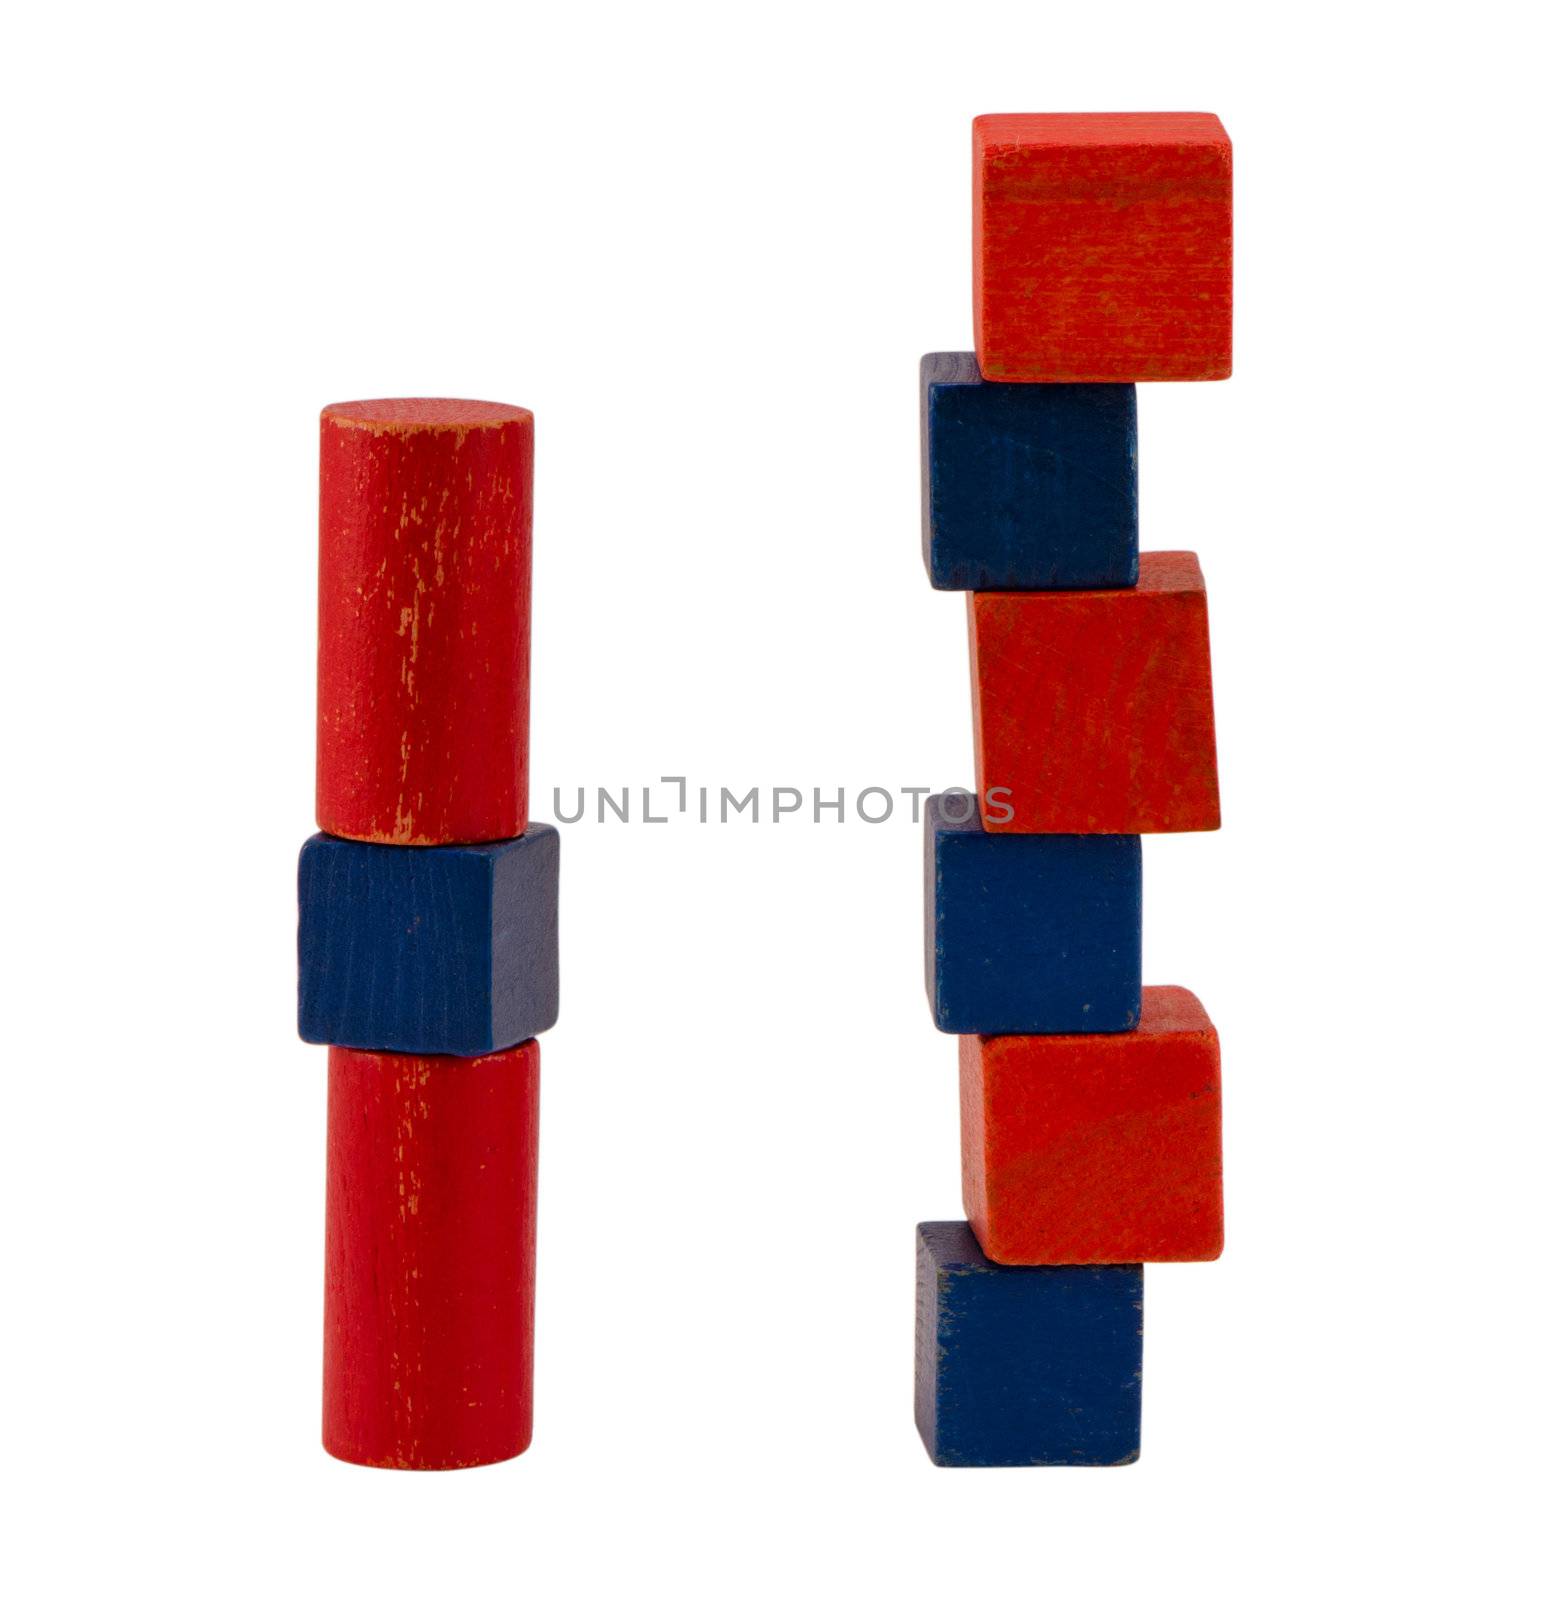 composition of red blue wooden retro log toy brick constructions stand isolated on white background.